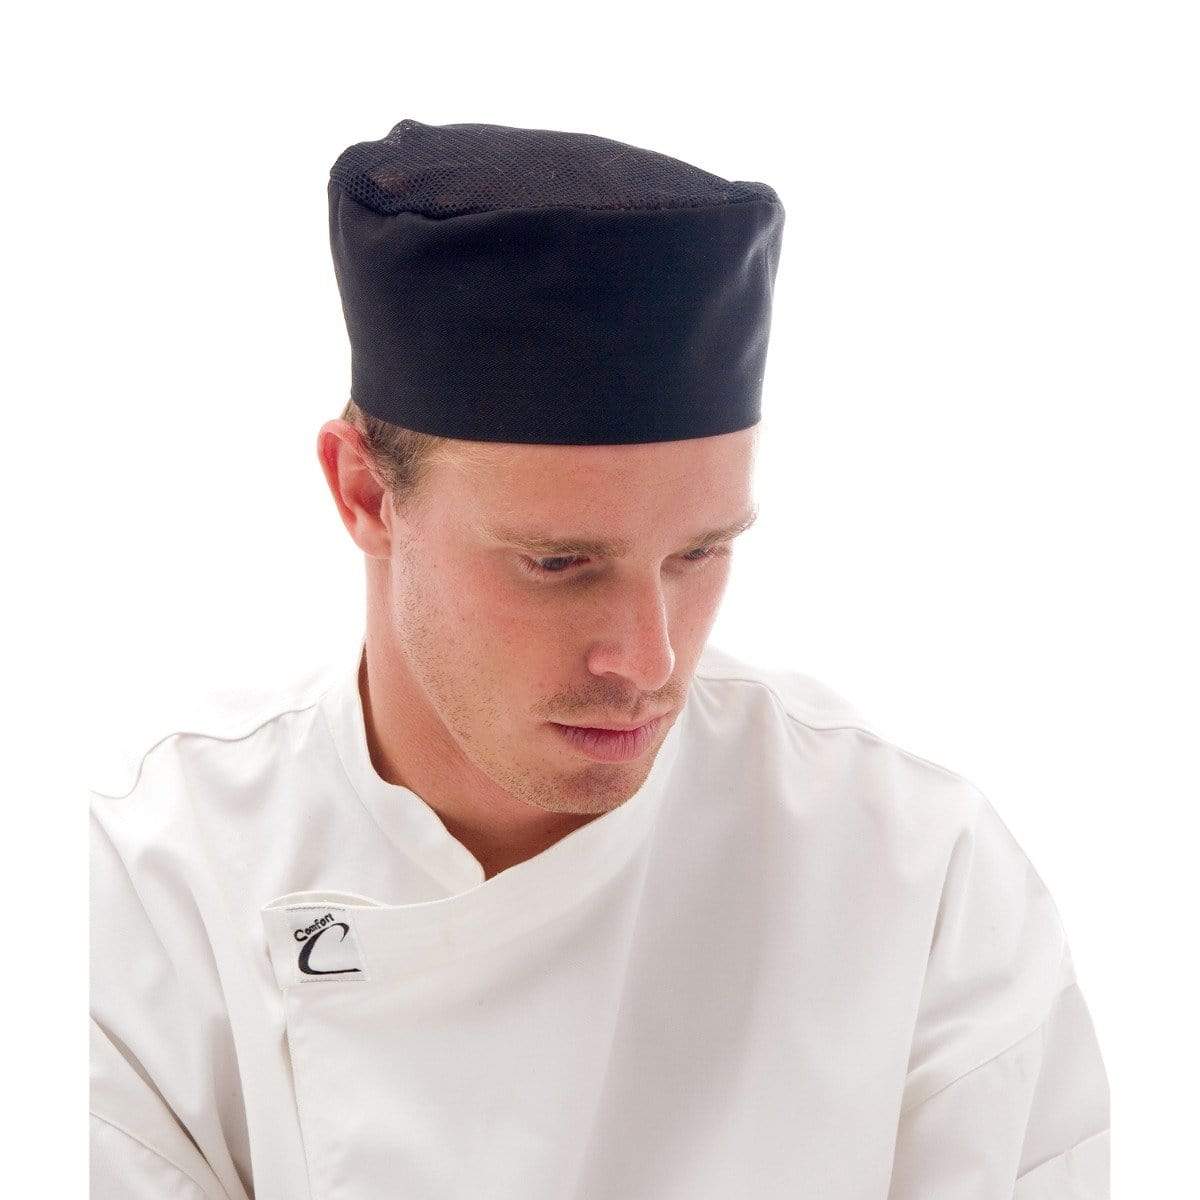 Dnc Workwear Cool-breeze Flat Top Hat With Air Flow Mesh Upper -1604 Hospitality & Chefwear DNC Workwear Black One Size 